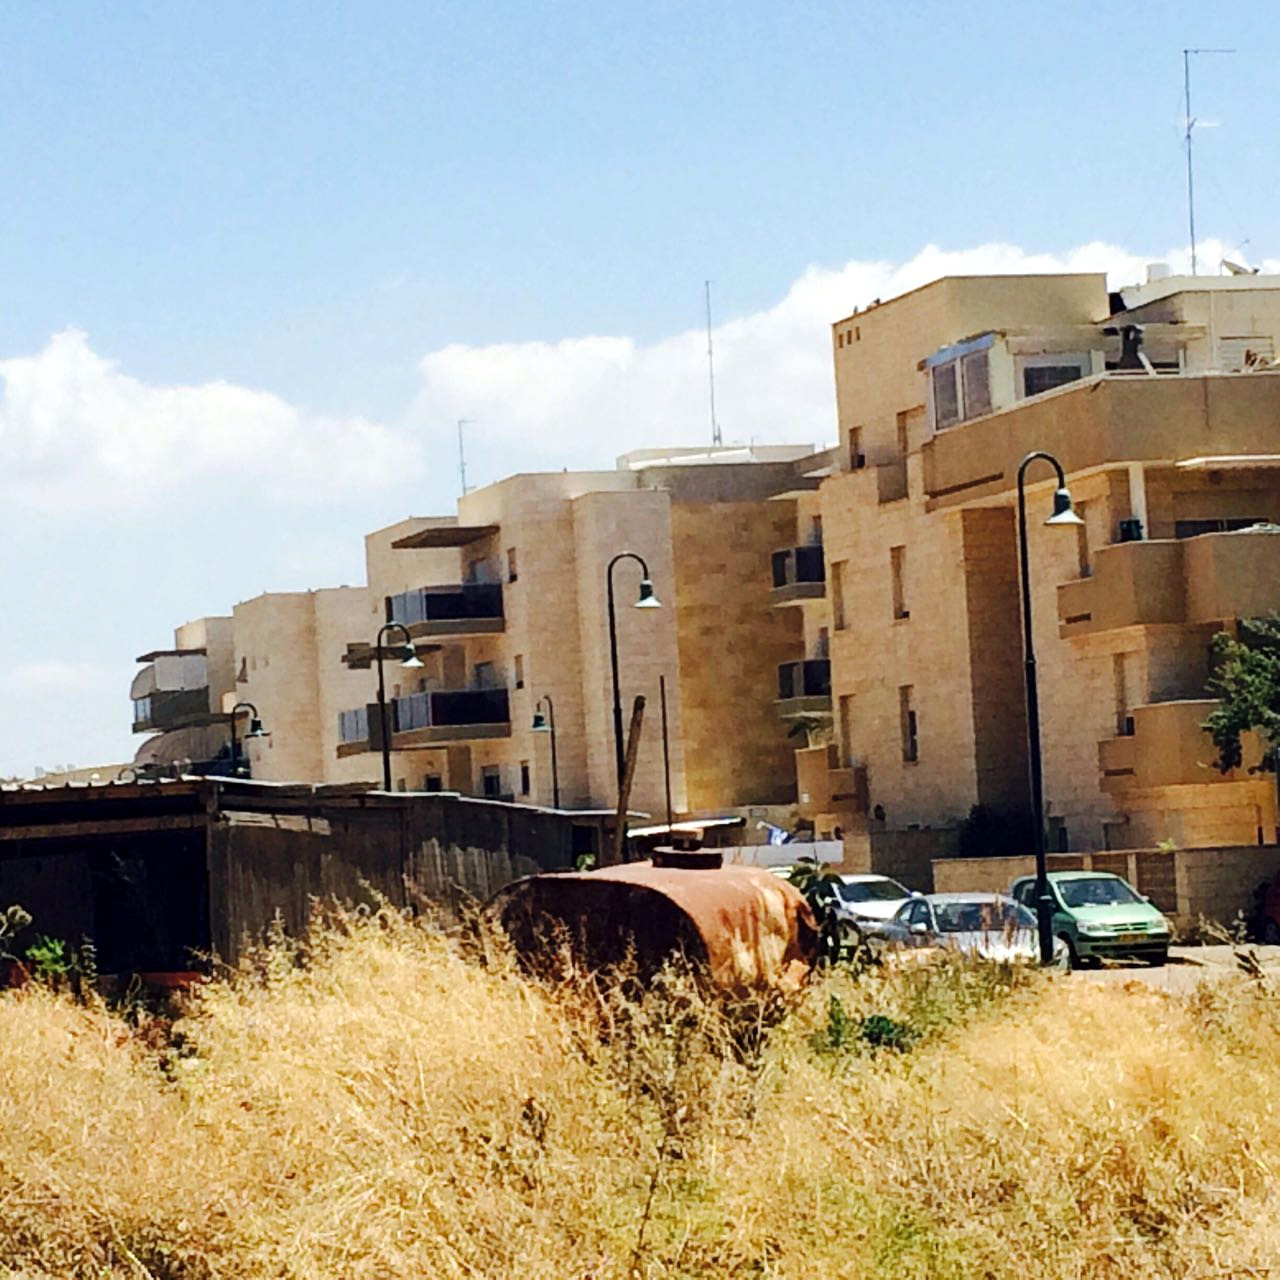 Bedouin village of Ramia, which found itself enclosed in Carmiel neighborhoods without a suitable solution for its residents.